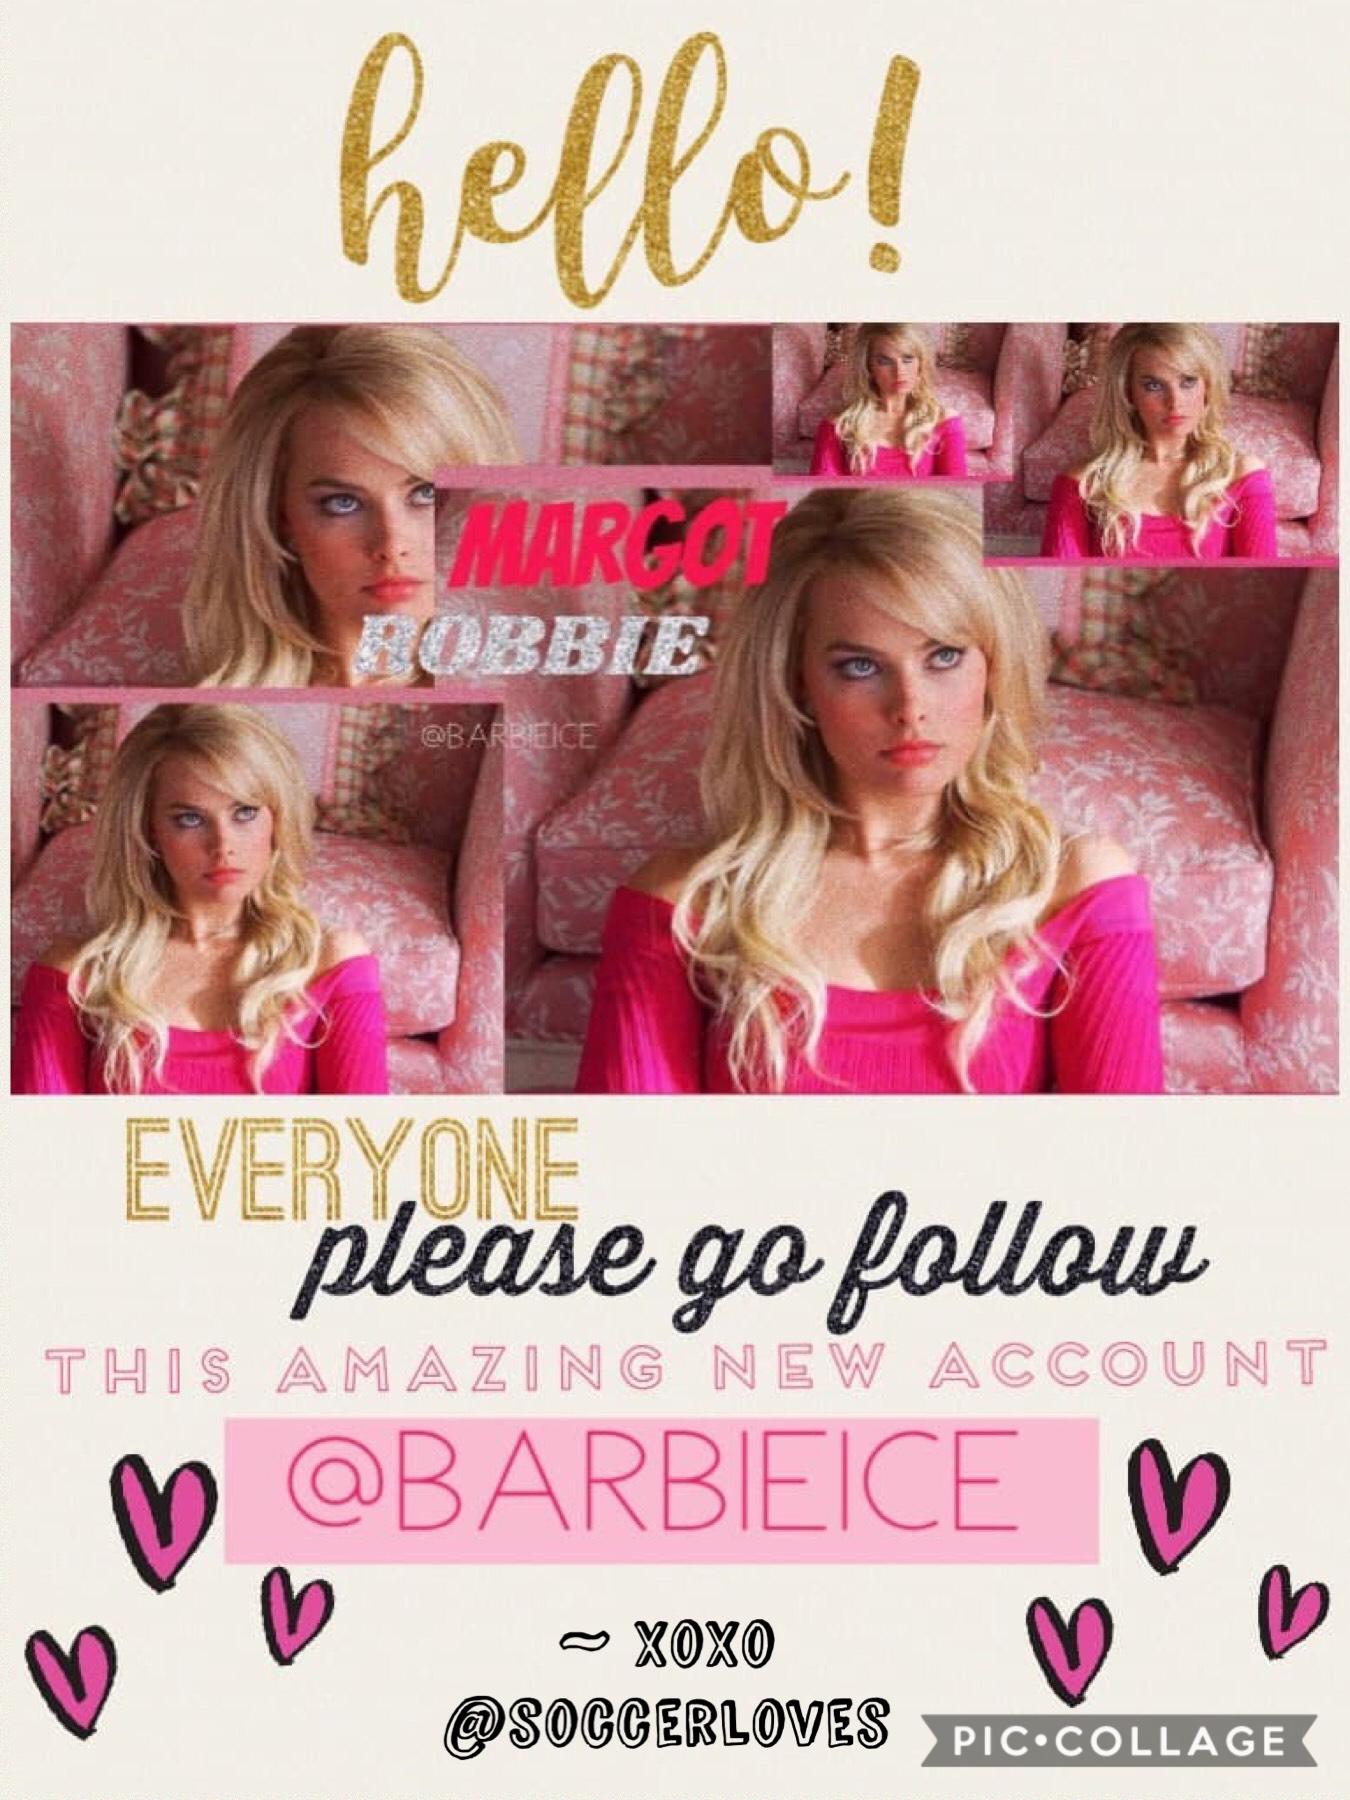 go follow @barbieice to see amazing edits!💓